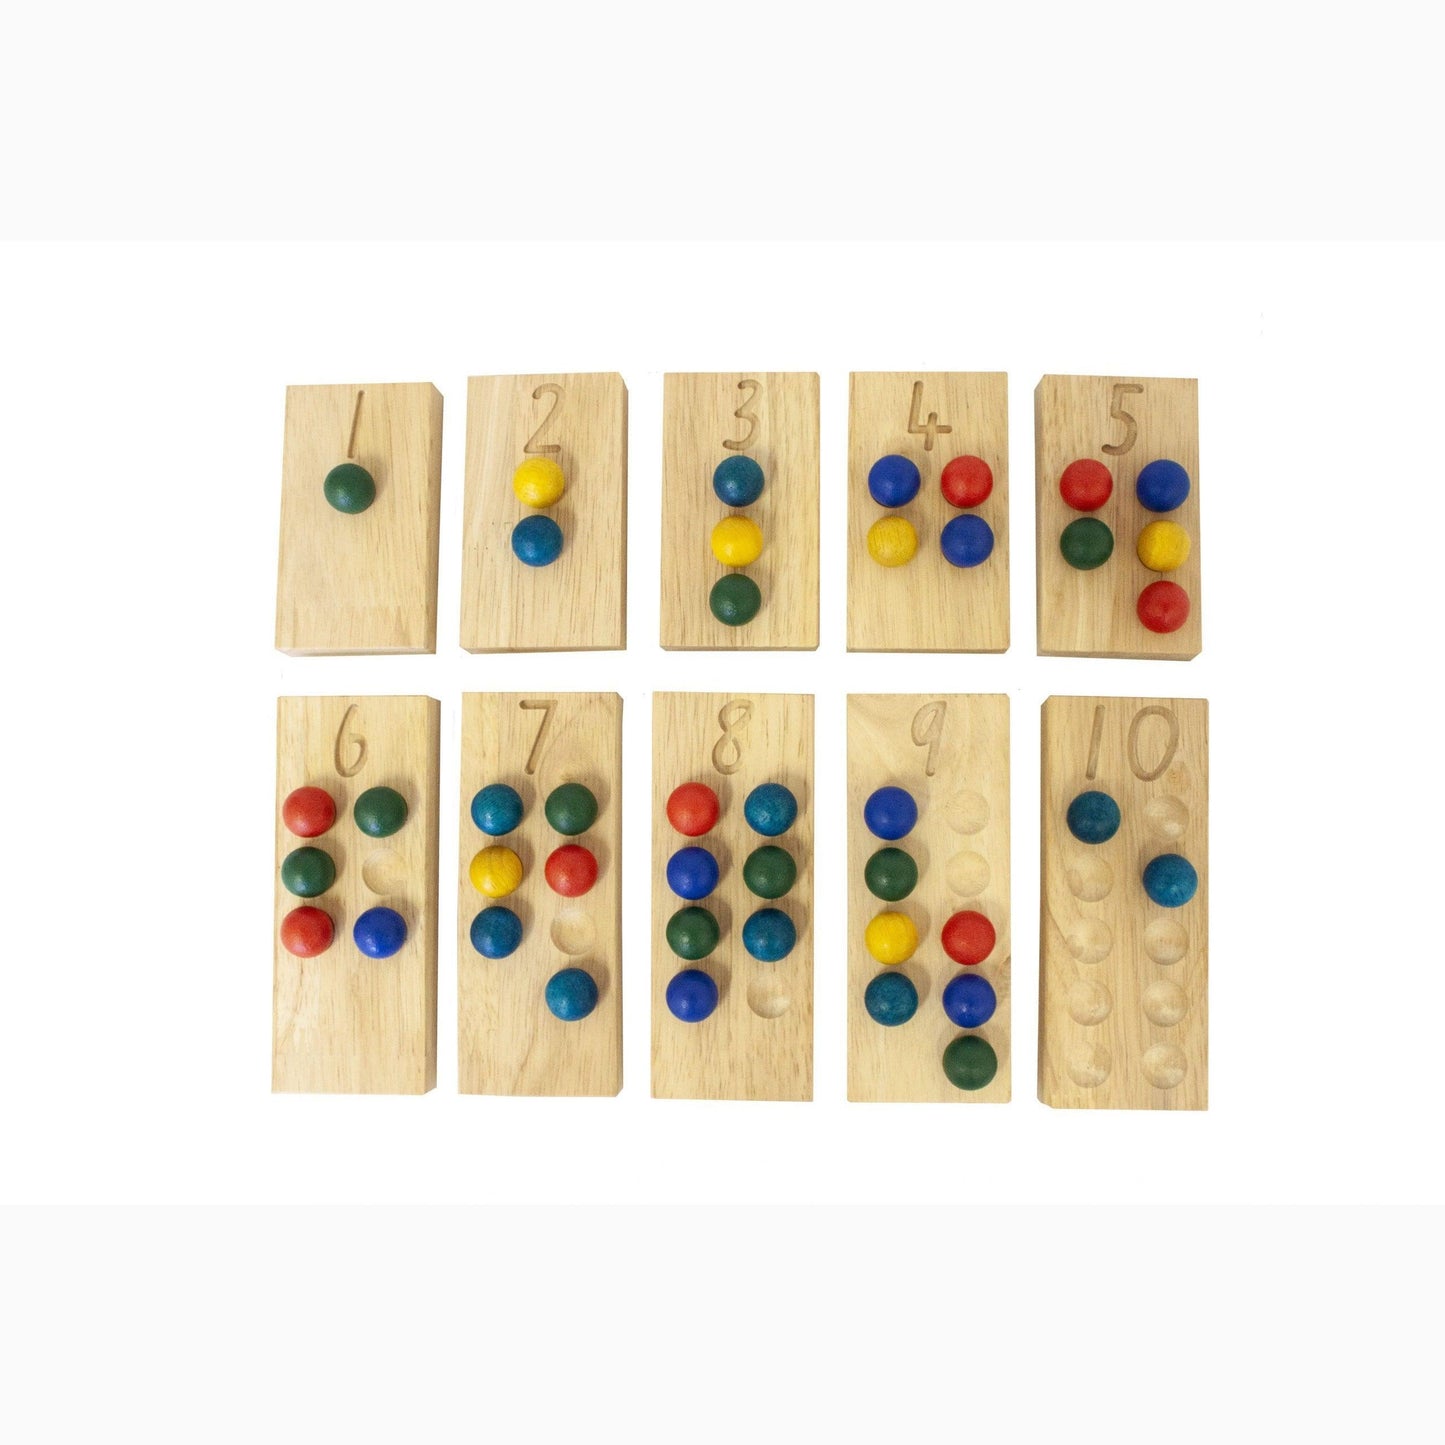 Counting and maths set